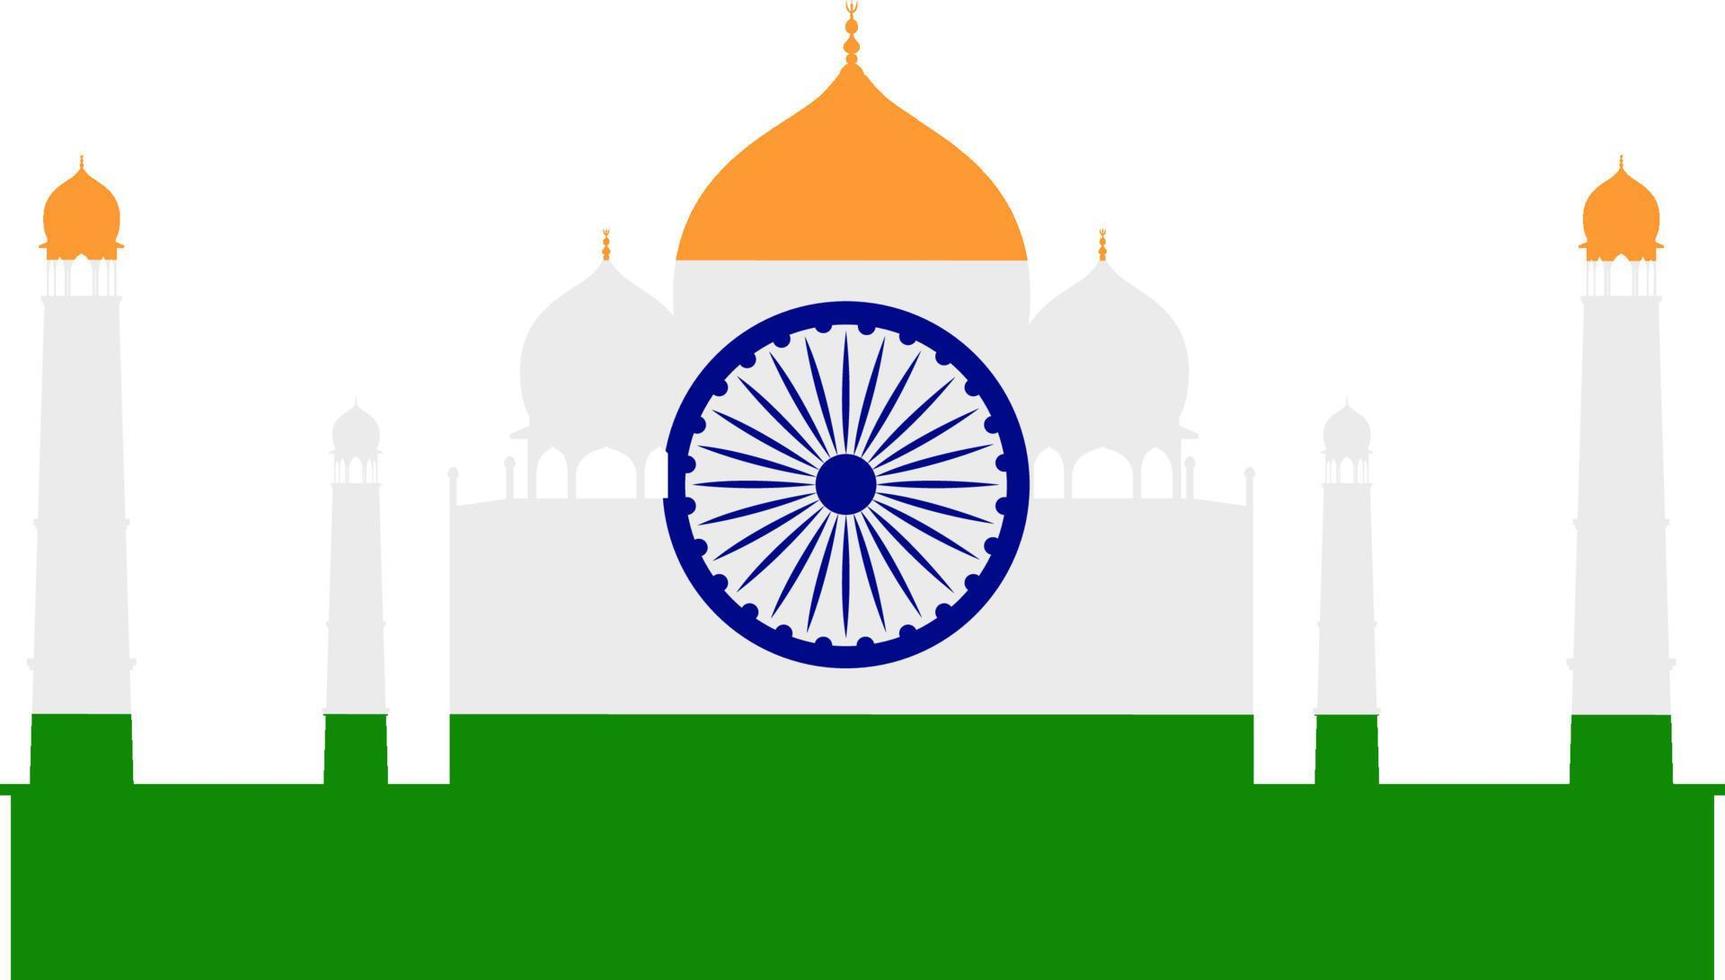 Flag design of country India with Taj Mahal background vector